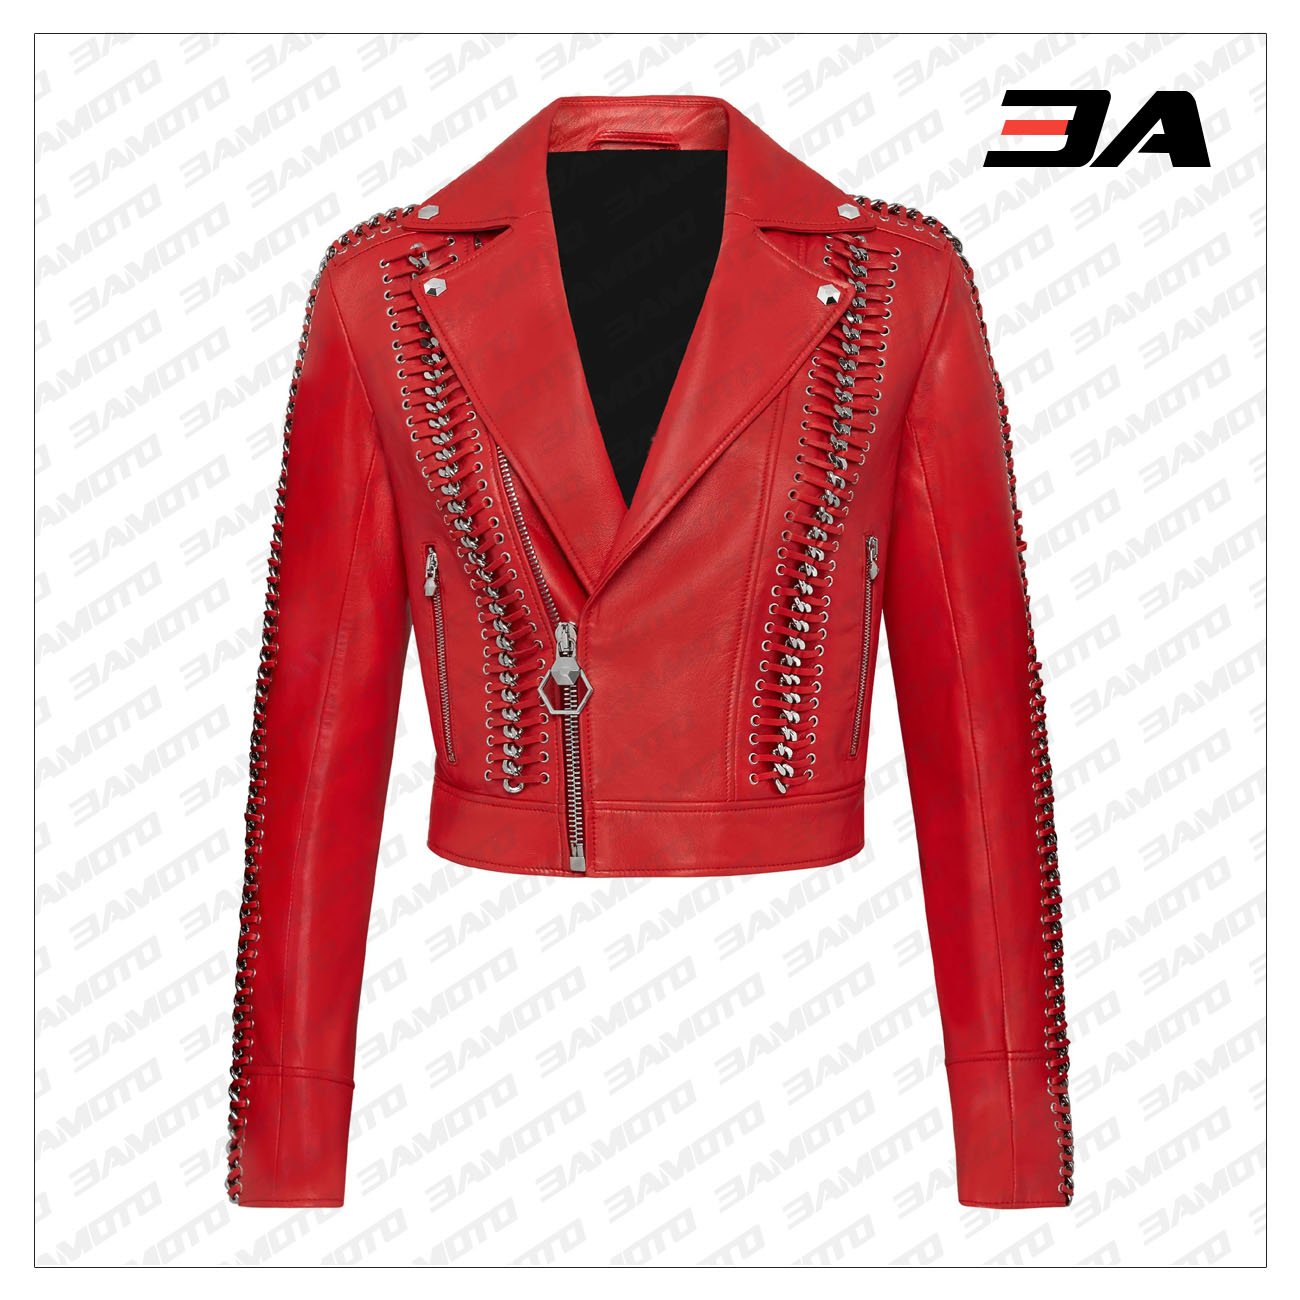 Red Perfecto Crystal Work Biker Jacket - 3A MOTO LEATHER